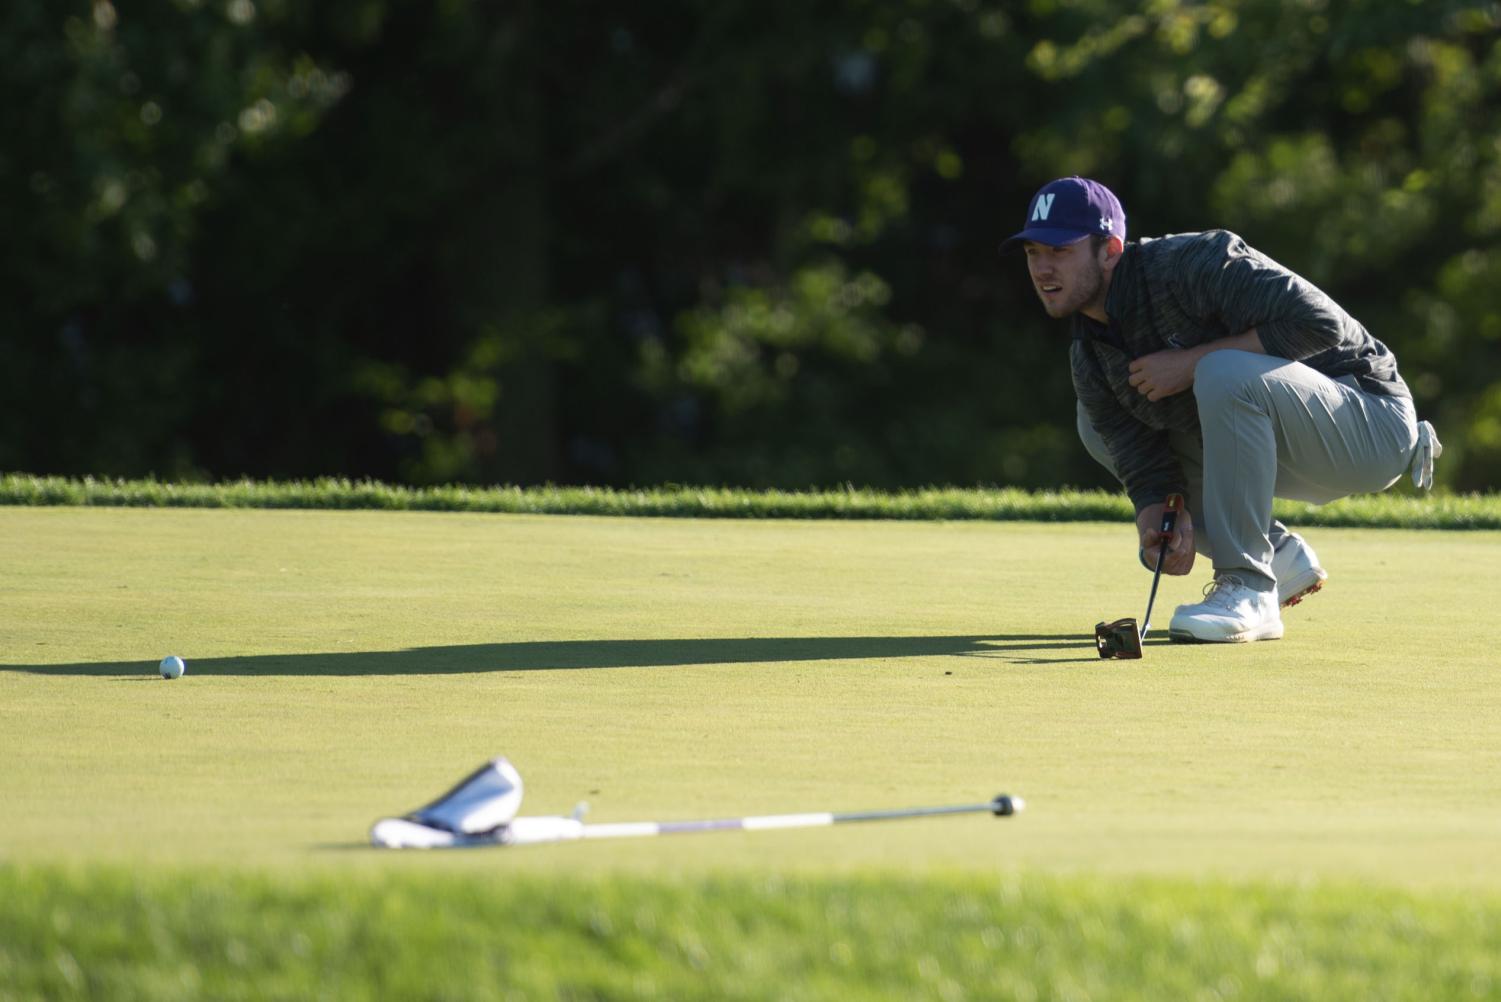 A+person+in+a+gray+shirt+and+purple+hat+looks+at+a+golf+ball+on+the+ground.